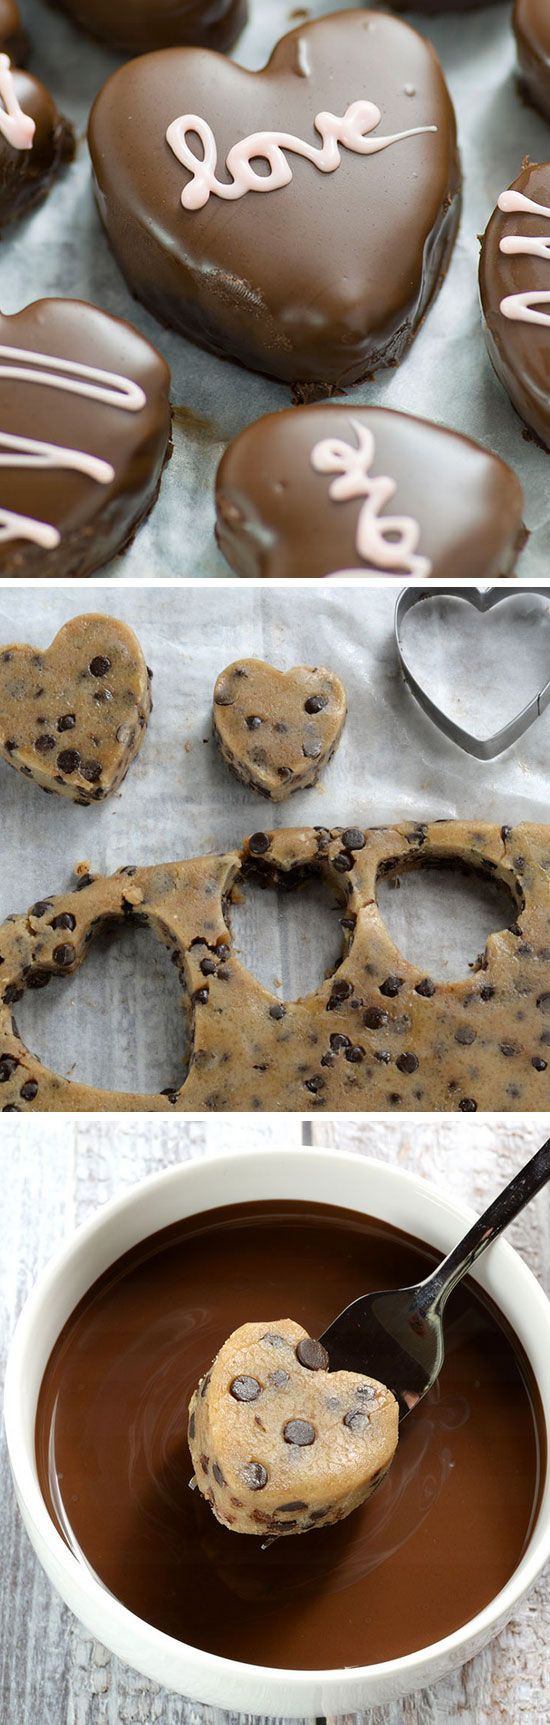 Easy Desserts With Chocolate Chips
 Chocolate Chip Cookie Dough Valentine’s Hearts